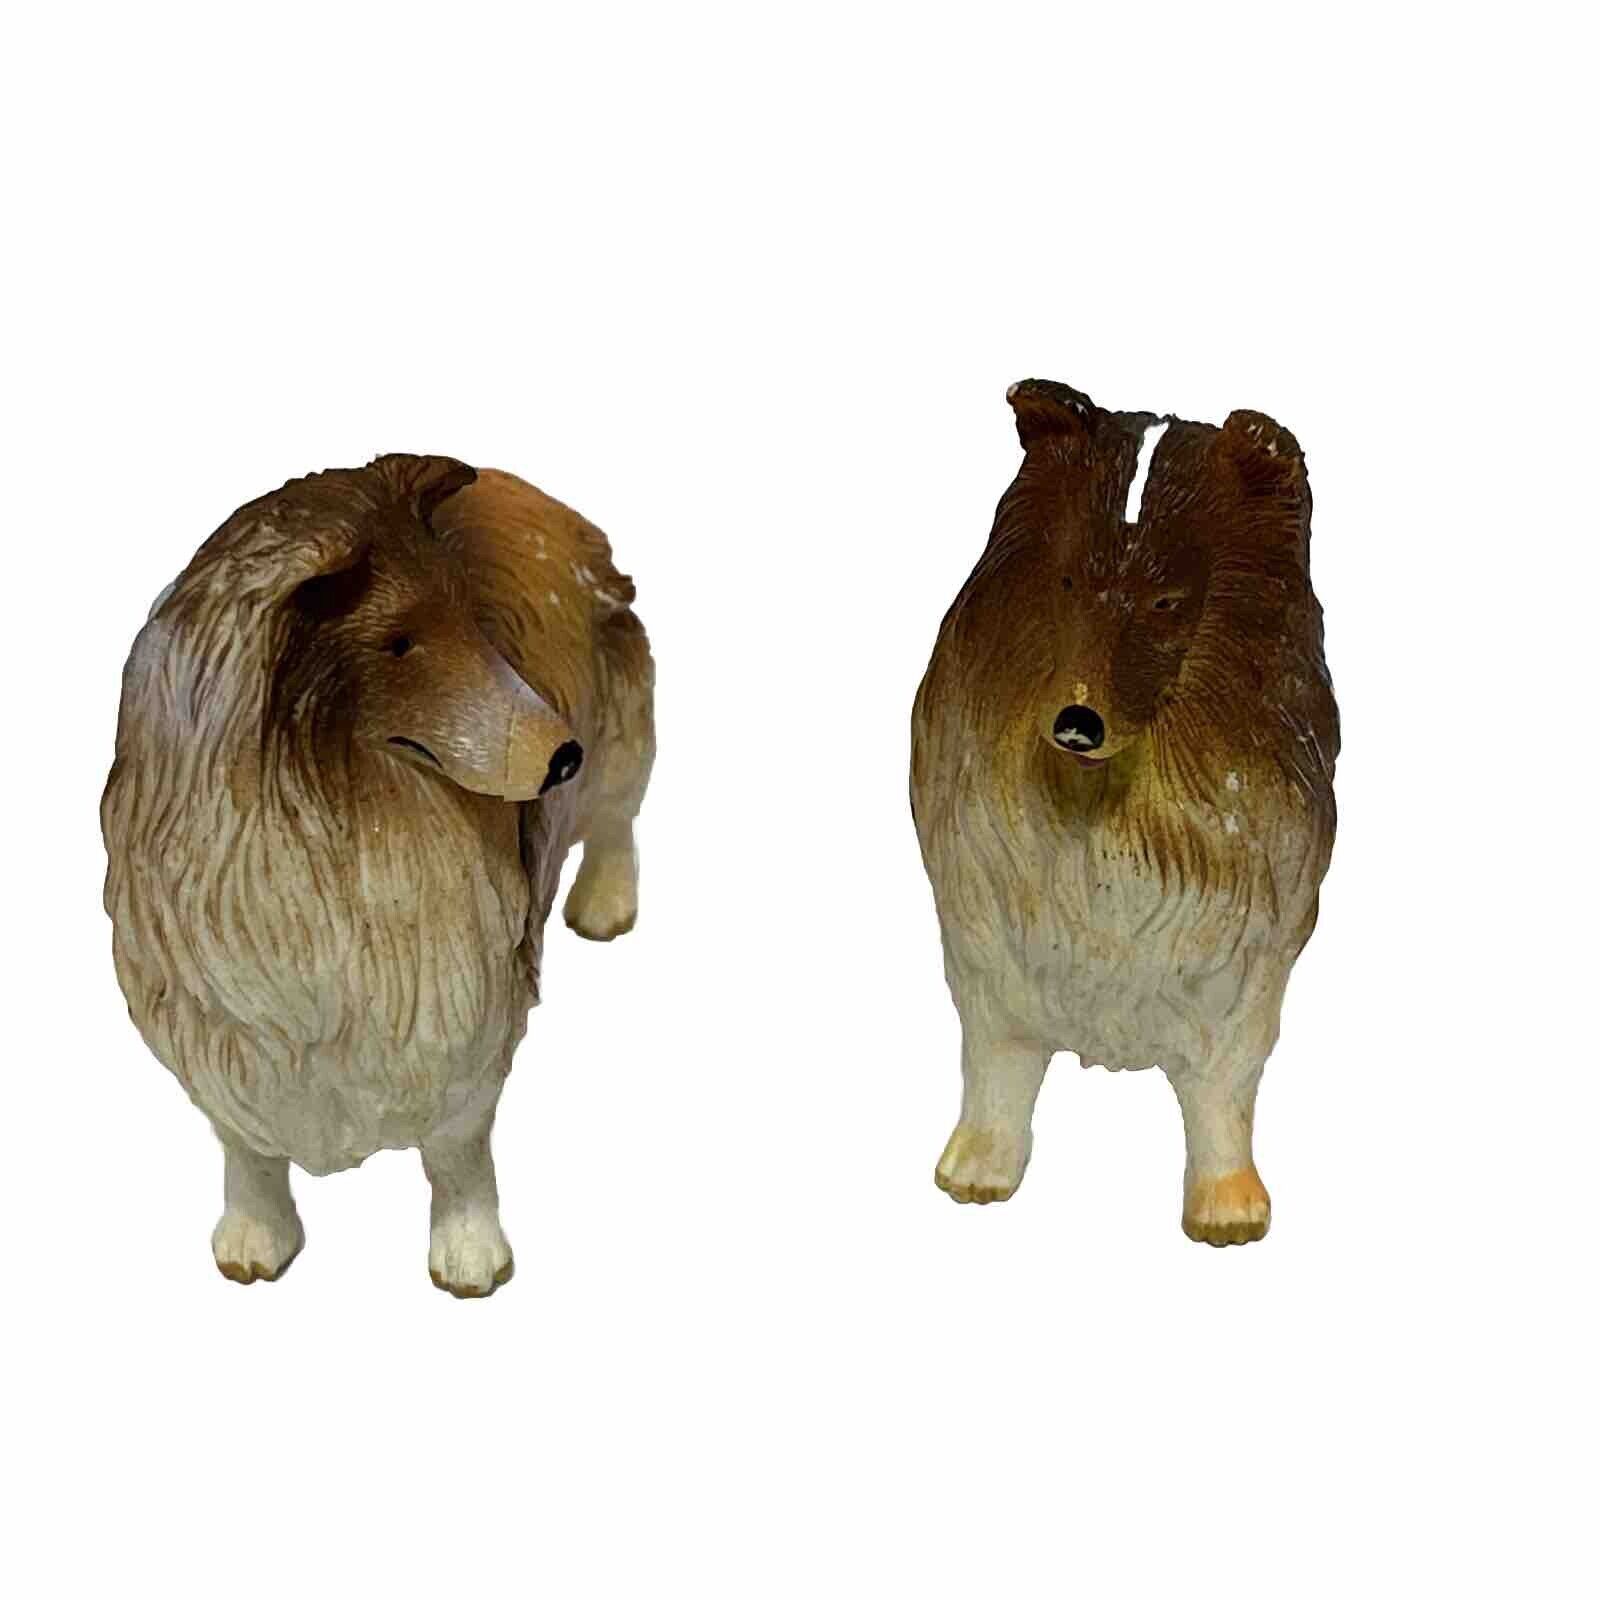 Pair Of Adorable Hard Rubber Toy Collies Lassie Dogs